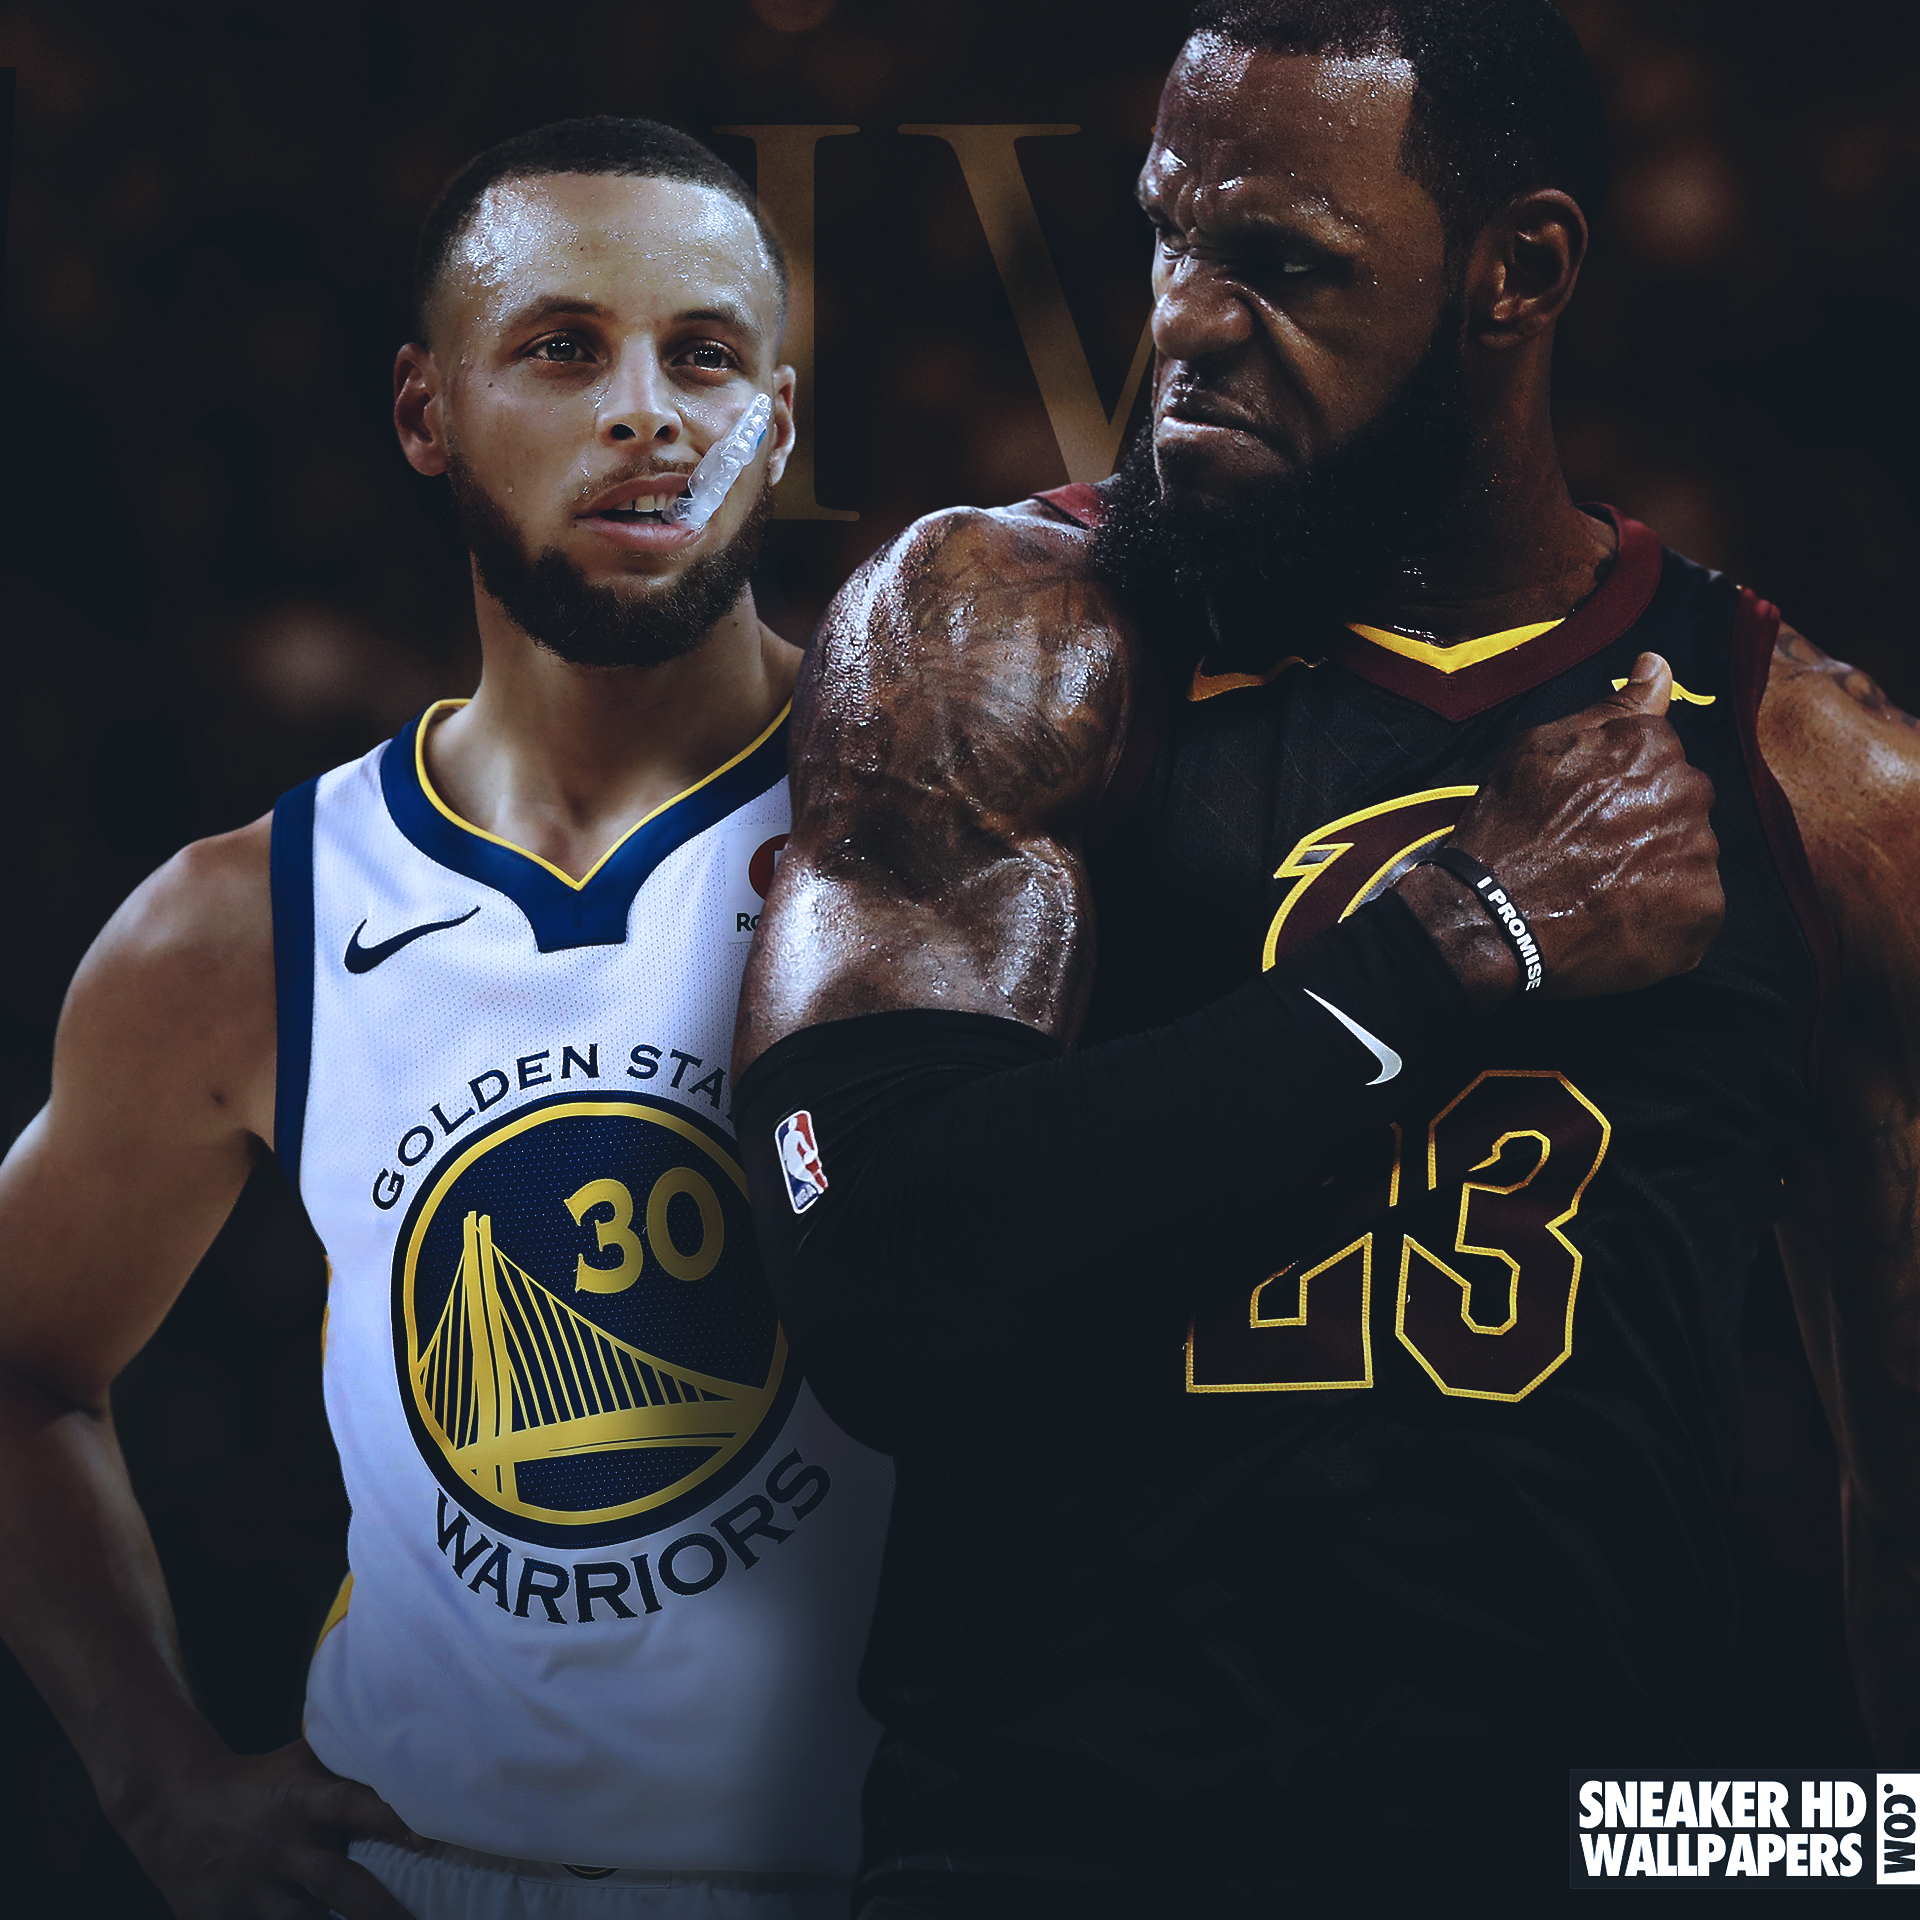  – Your favorite sneakers in 4K, Retina, Mobile and  HD wallpaper resolutions! Stephen Curry Archives   - Your favorite sneakers in 4K, Retina, Mobile and HD wallpaper resolutions!